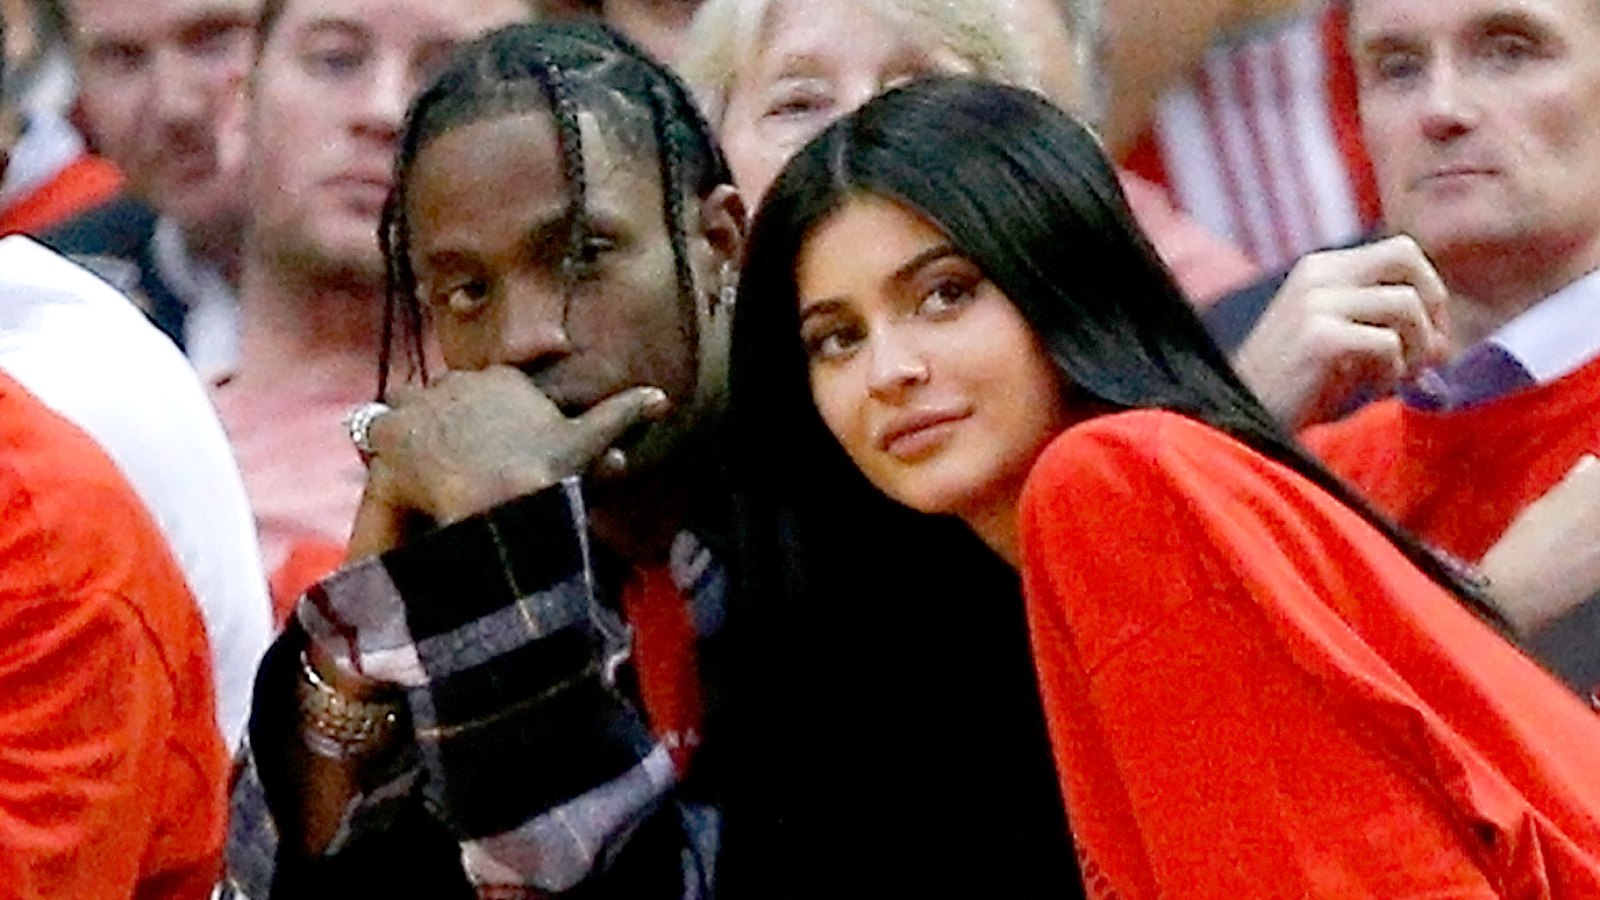 Travis Scott and Kylie Jenner watch courtside during Game Five of the Western Conference Quarterfinals game of the 2017 NBA Playoffs at Toyota Center on April 25, 2017 in Houston, Texas.